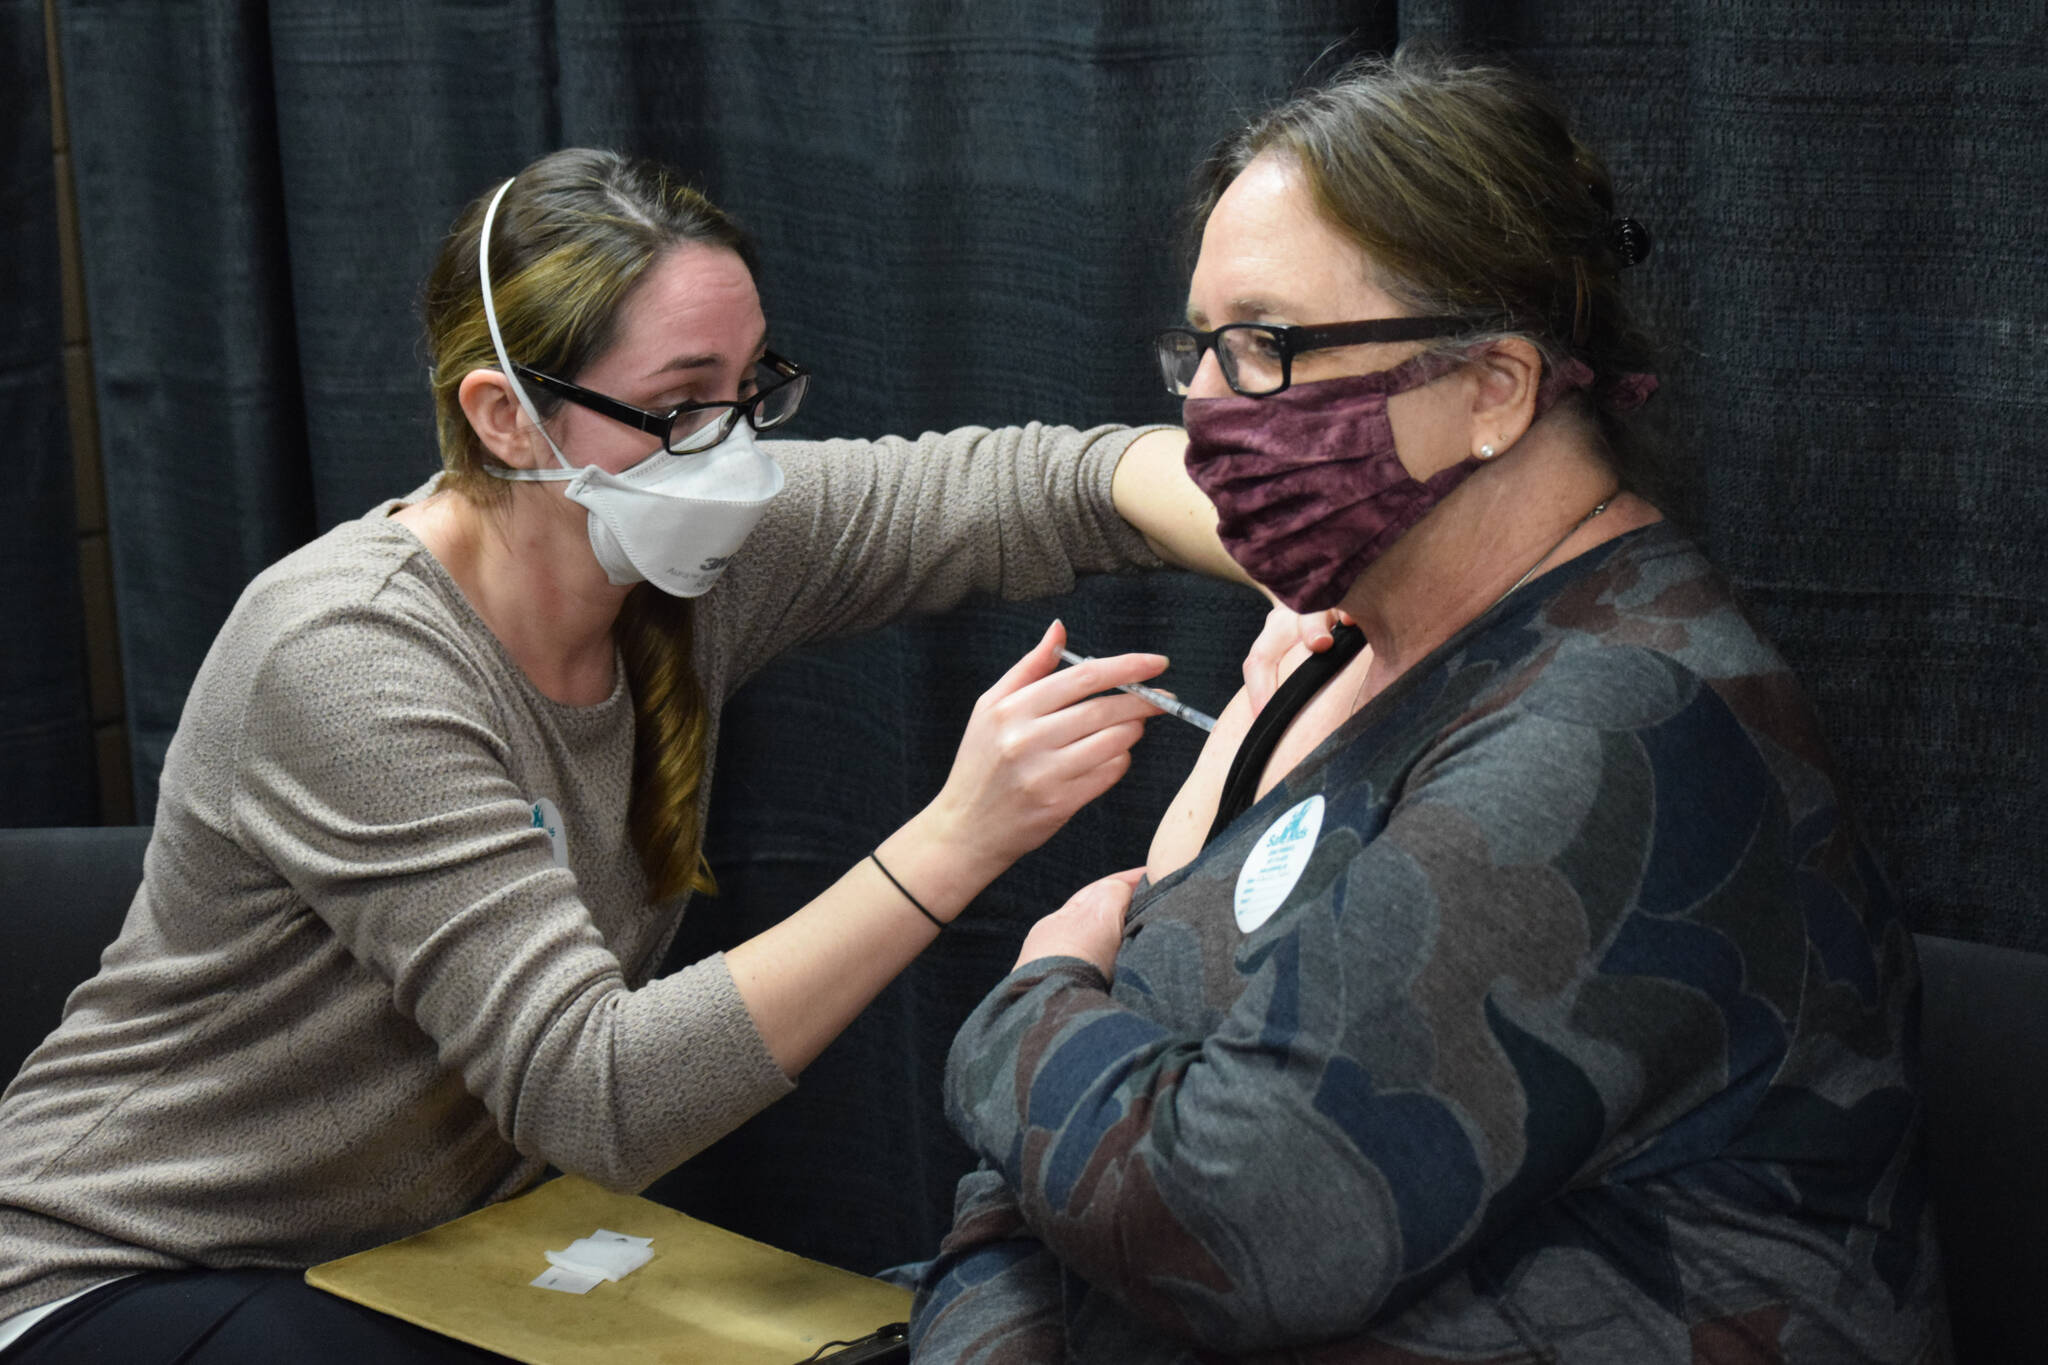 Kenai Public Health Nurse Sherra Pritchard gives Love Inc. Director Leslie Rohr a COVID-19 booster shot during the Project Homeless Connect event Soldotna Regional Sports Complex in Soldotna on Wednesday, Jan. 26, 2022. (Camille Botello/Peninsula Clarion)